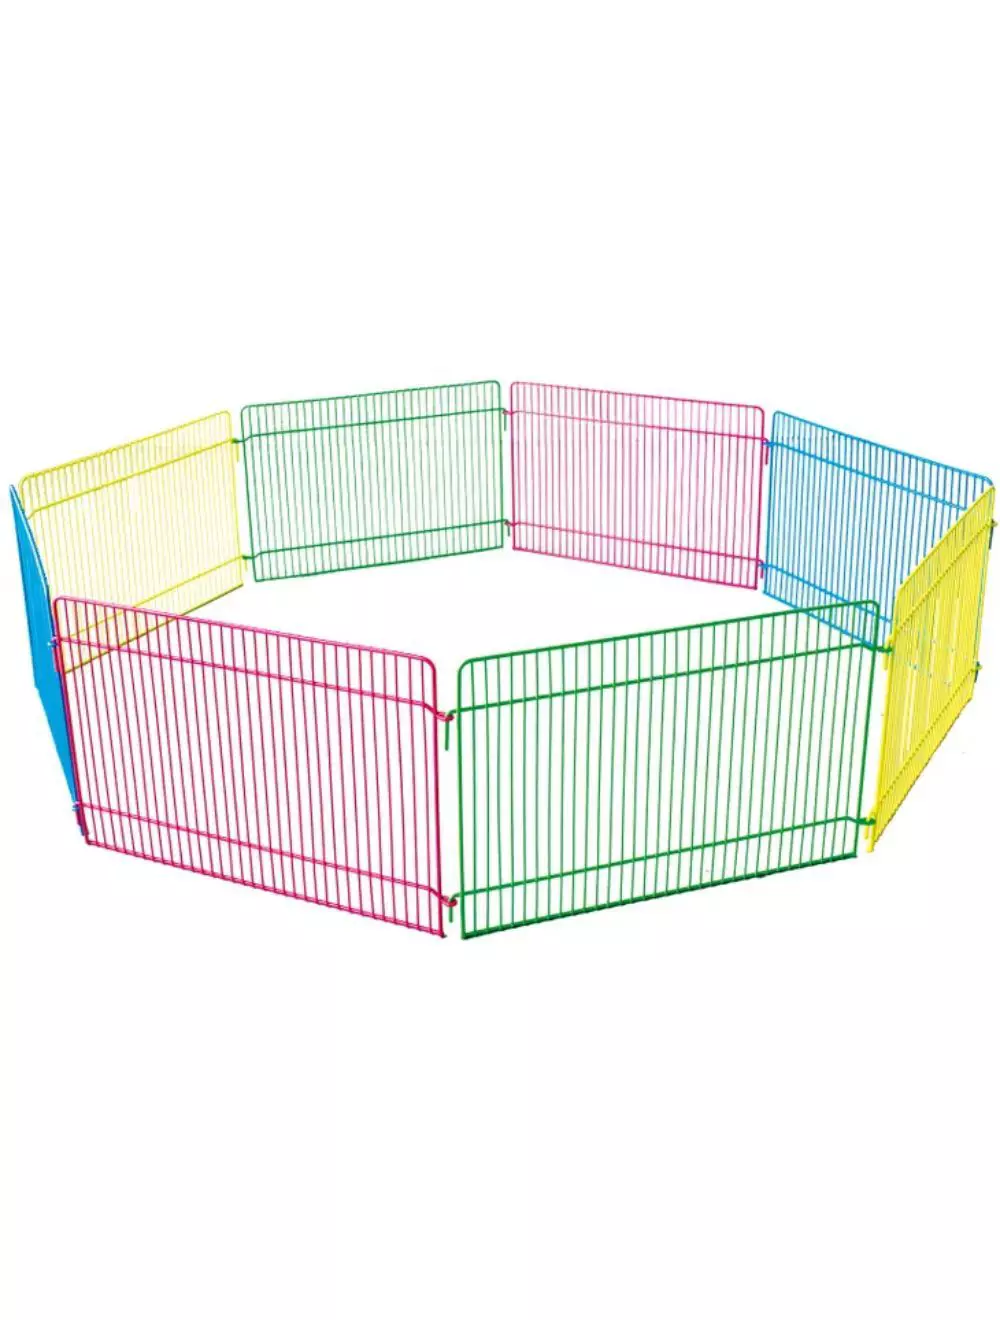 Flamingo Playpen For Rabbits And Guineapigs